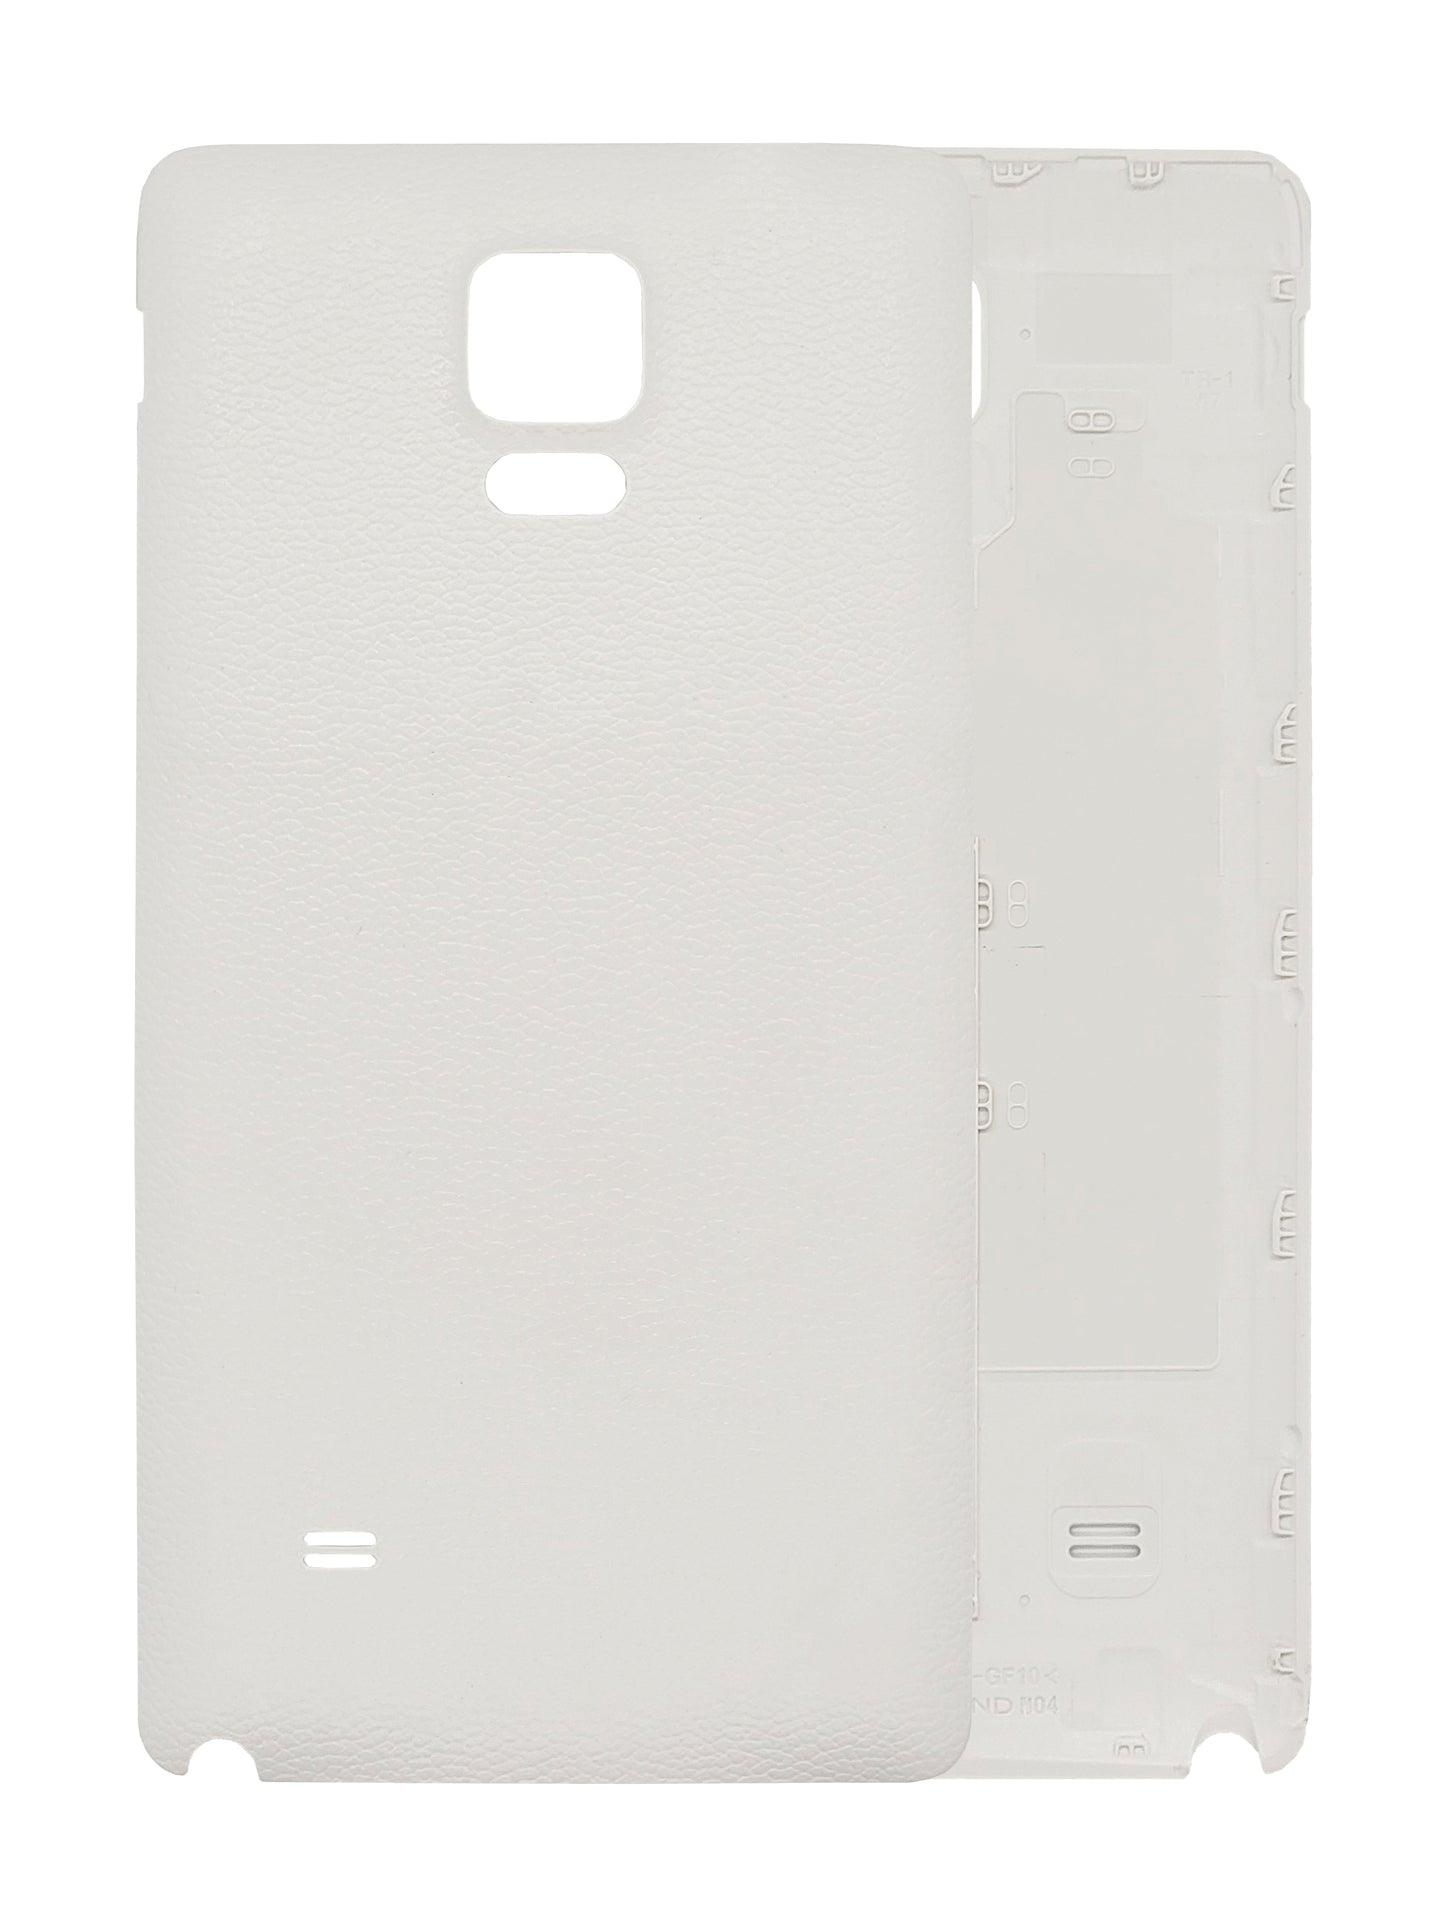 SGN Note 4 Back Cover (White)